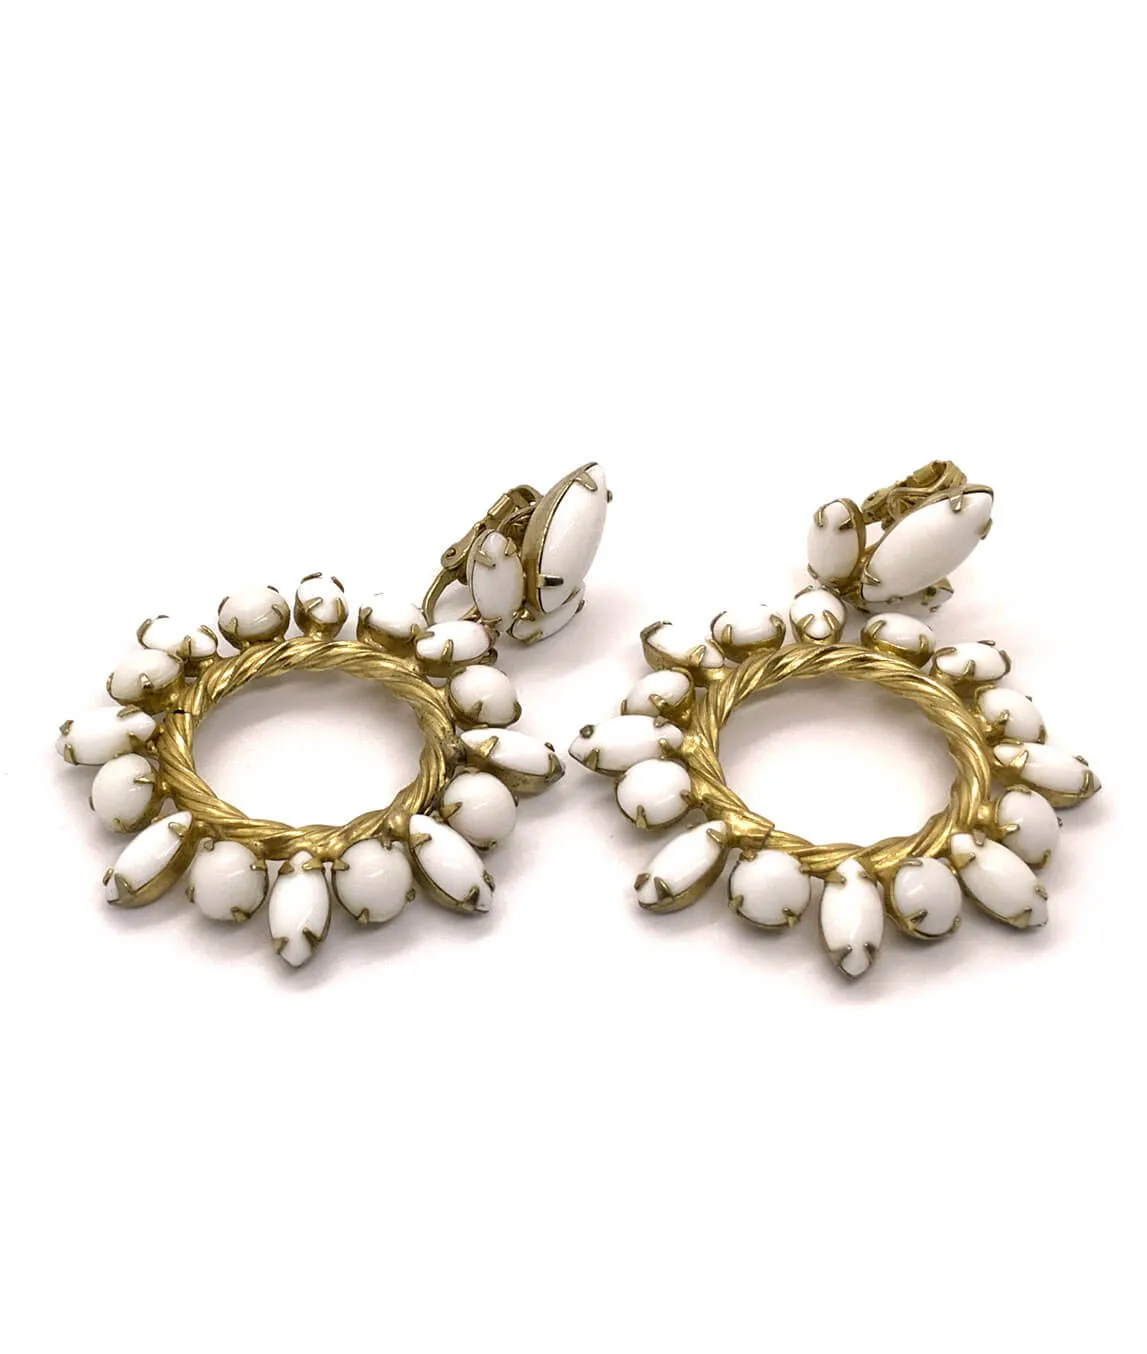 1950s milk glass and gold tone earrings